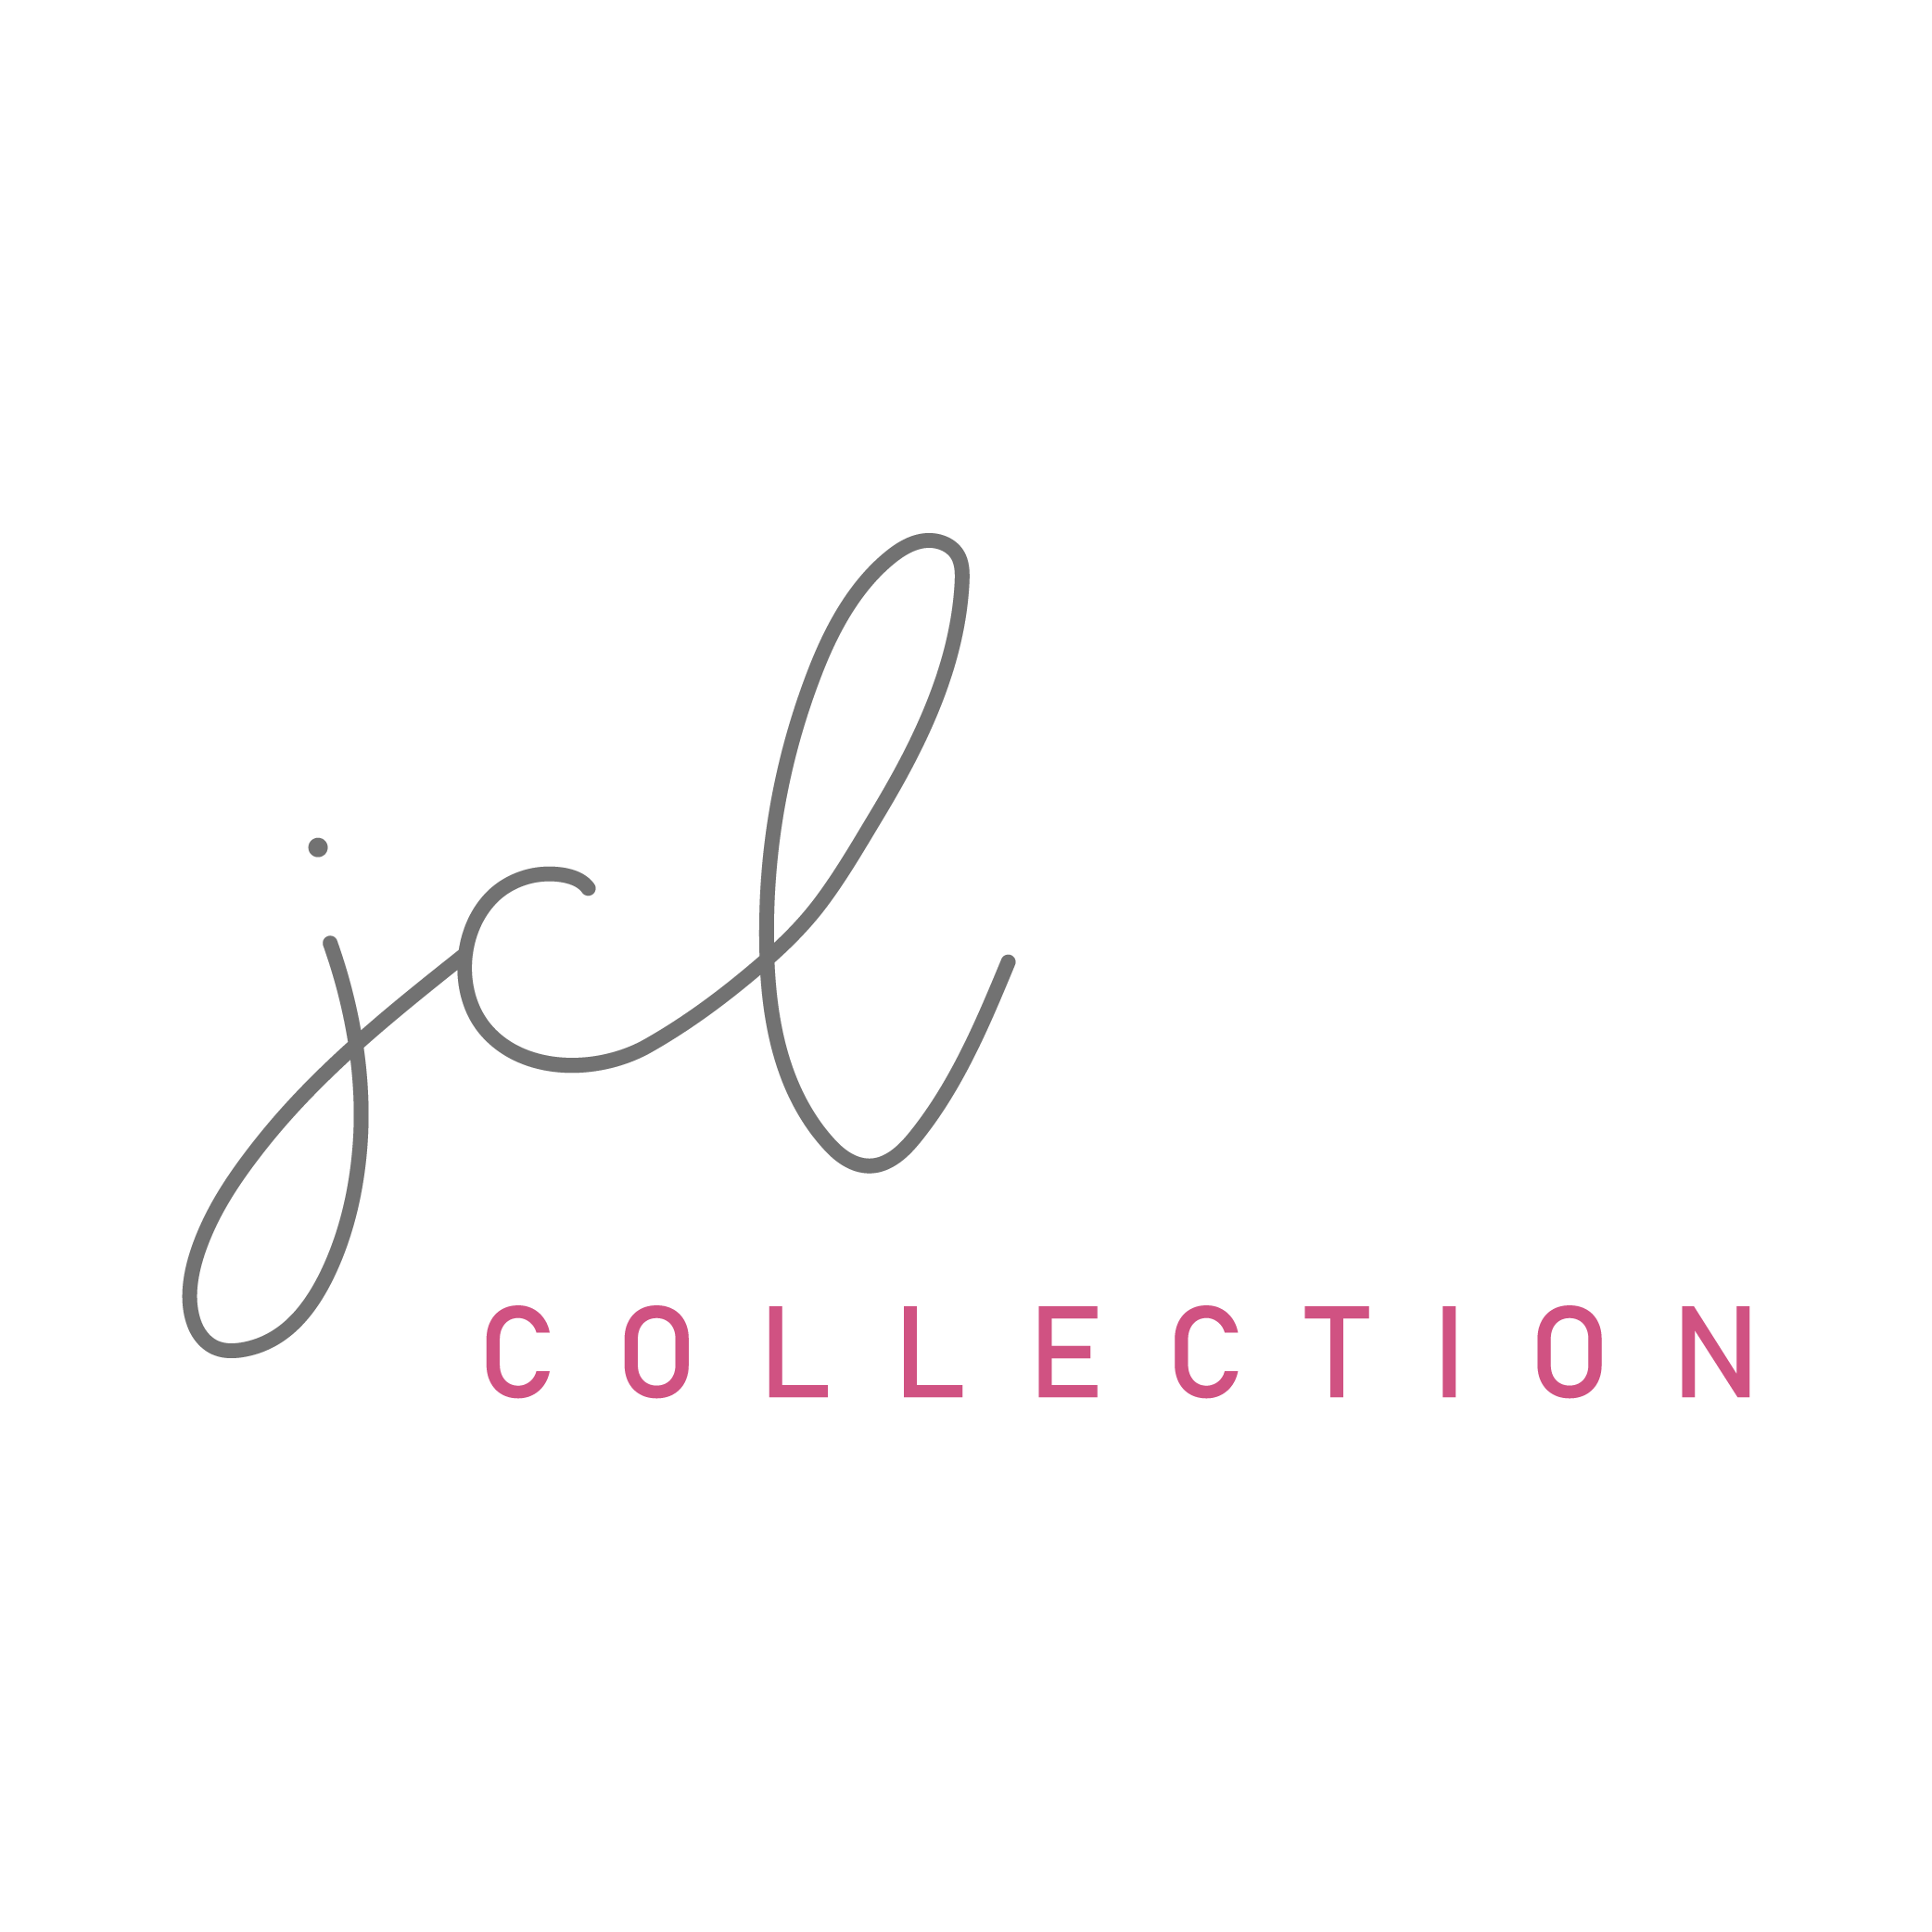 The JCL Collection